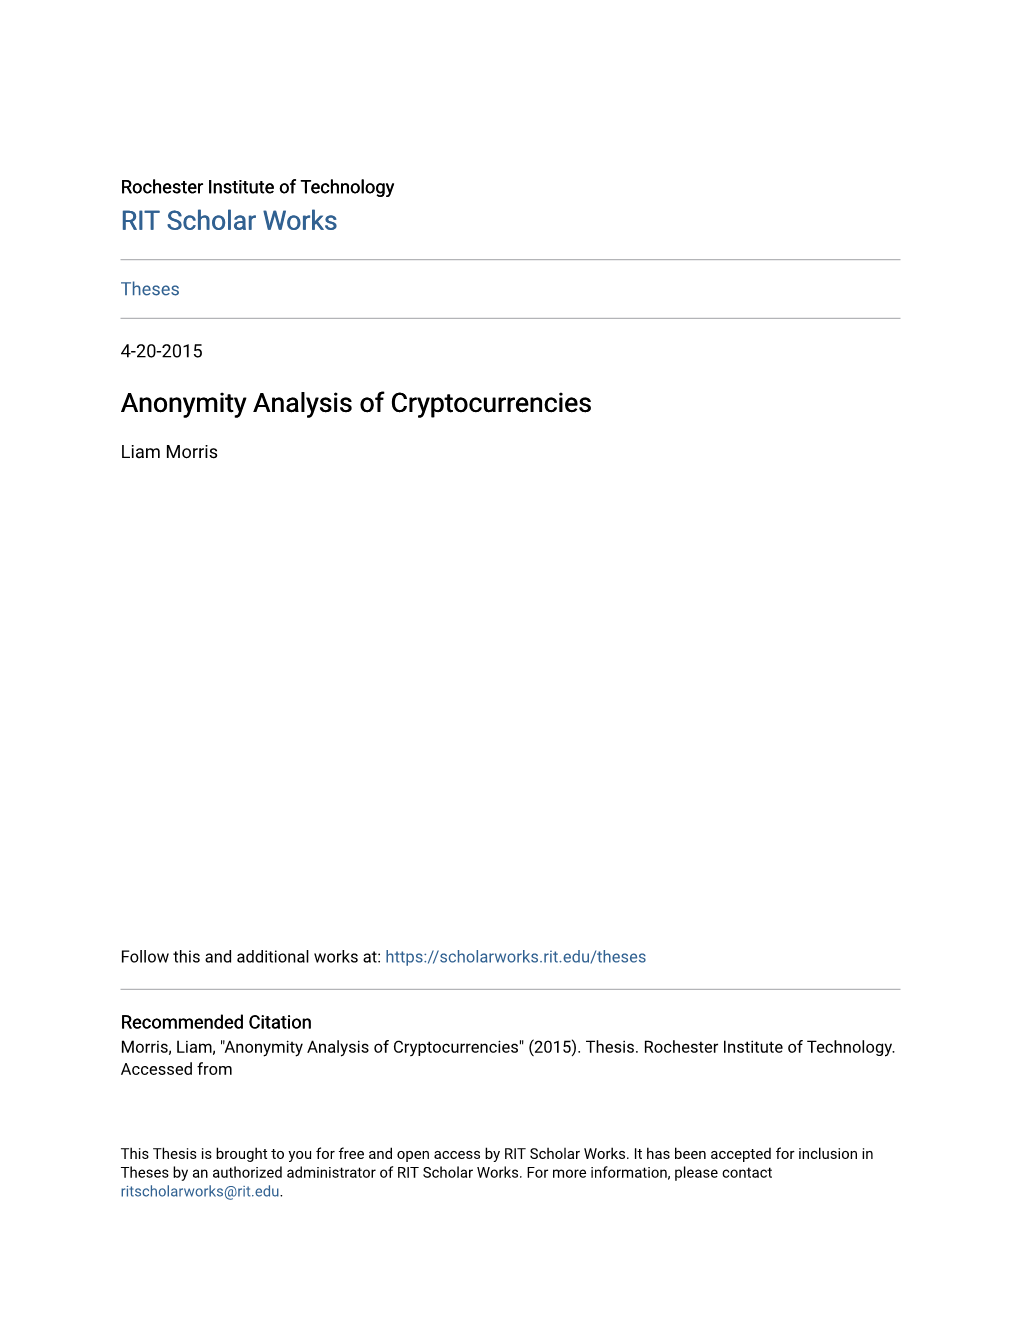 Anonymity Analysis of Cryptocurrencies